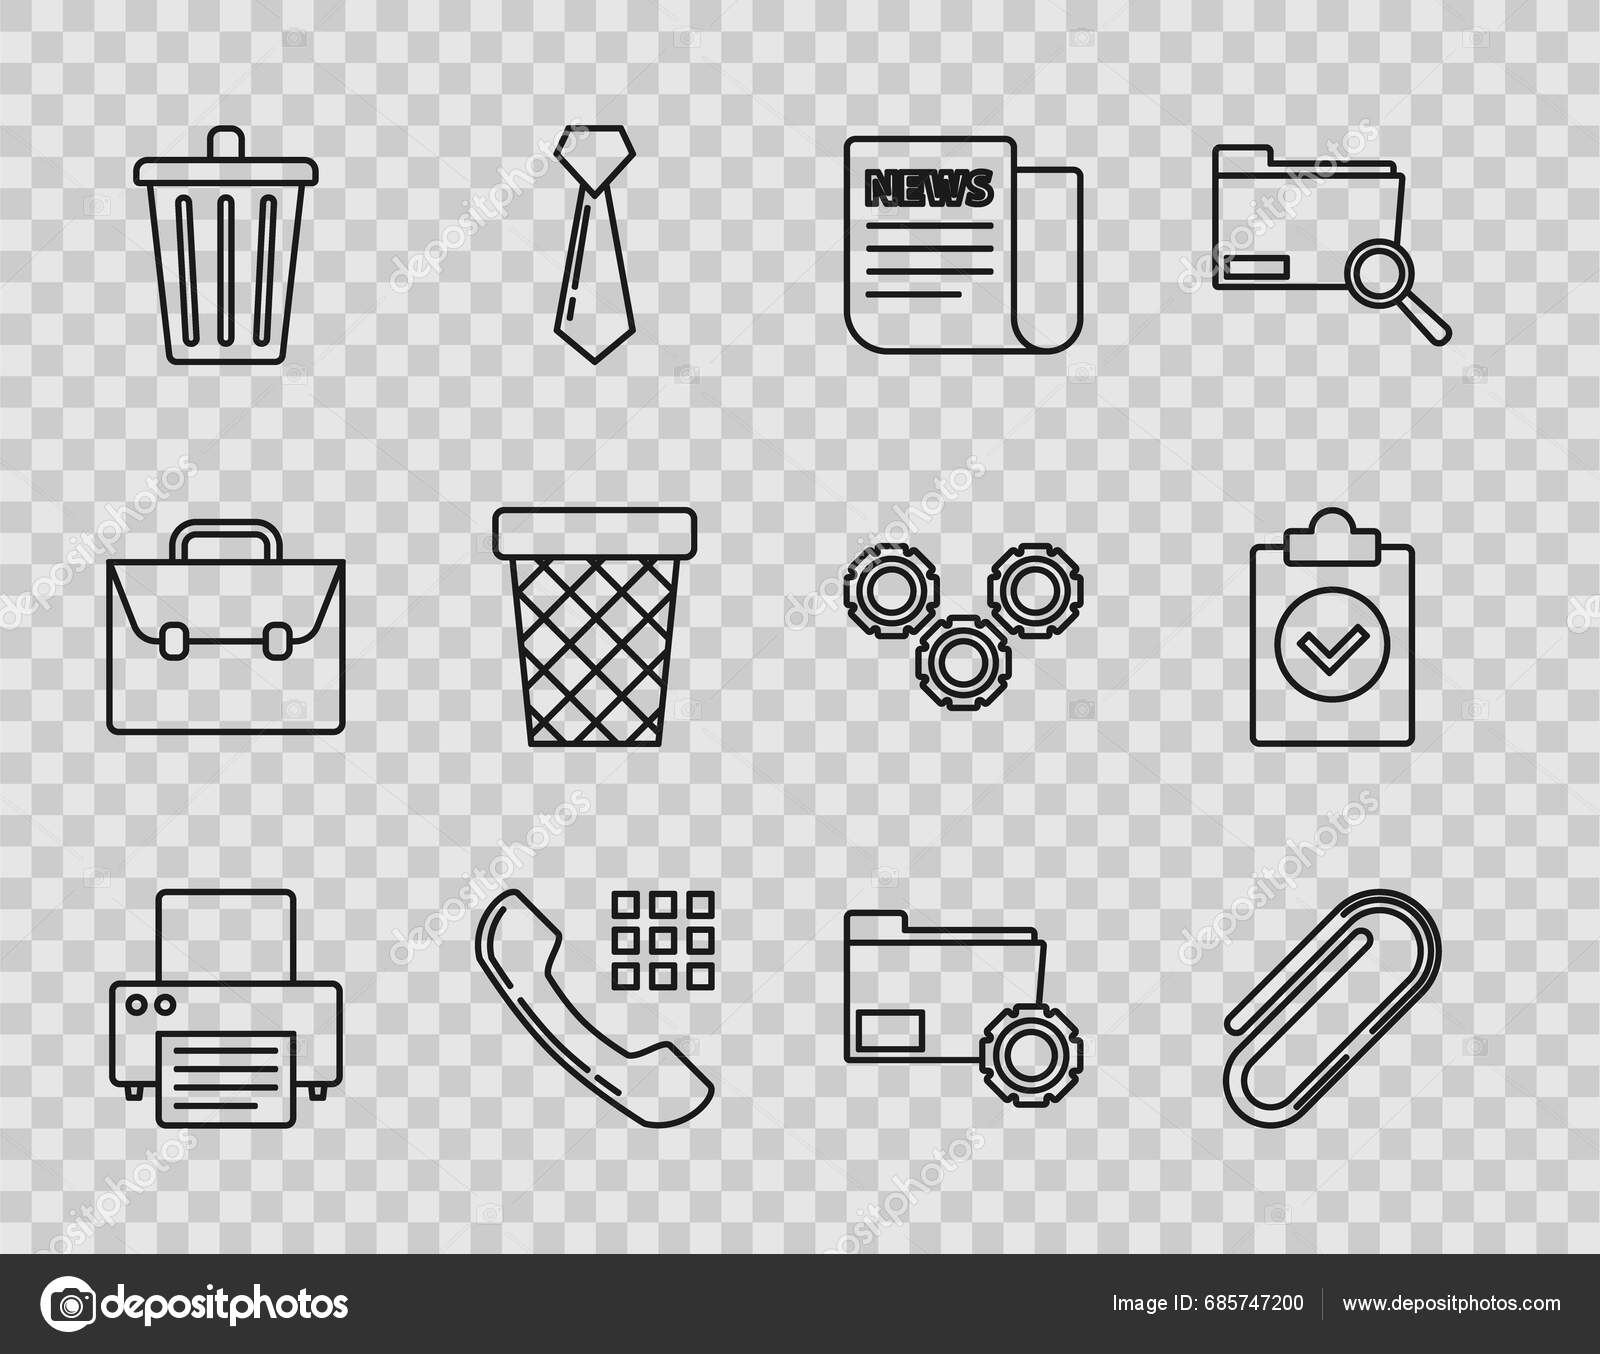 Hand drawn Stock Illustration of business accessories and